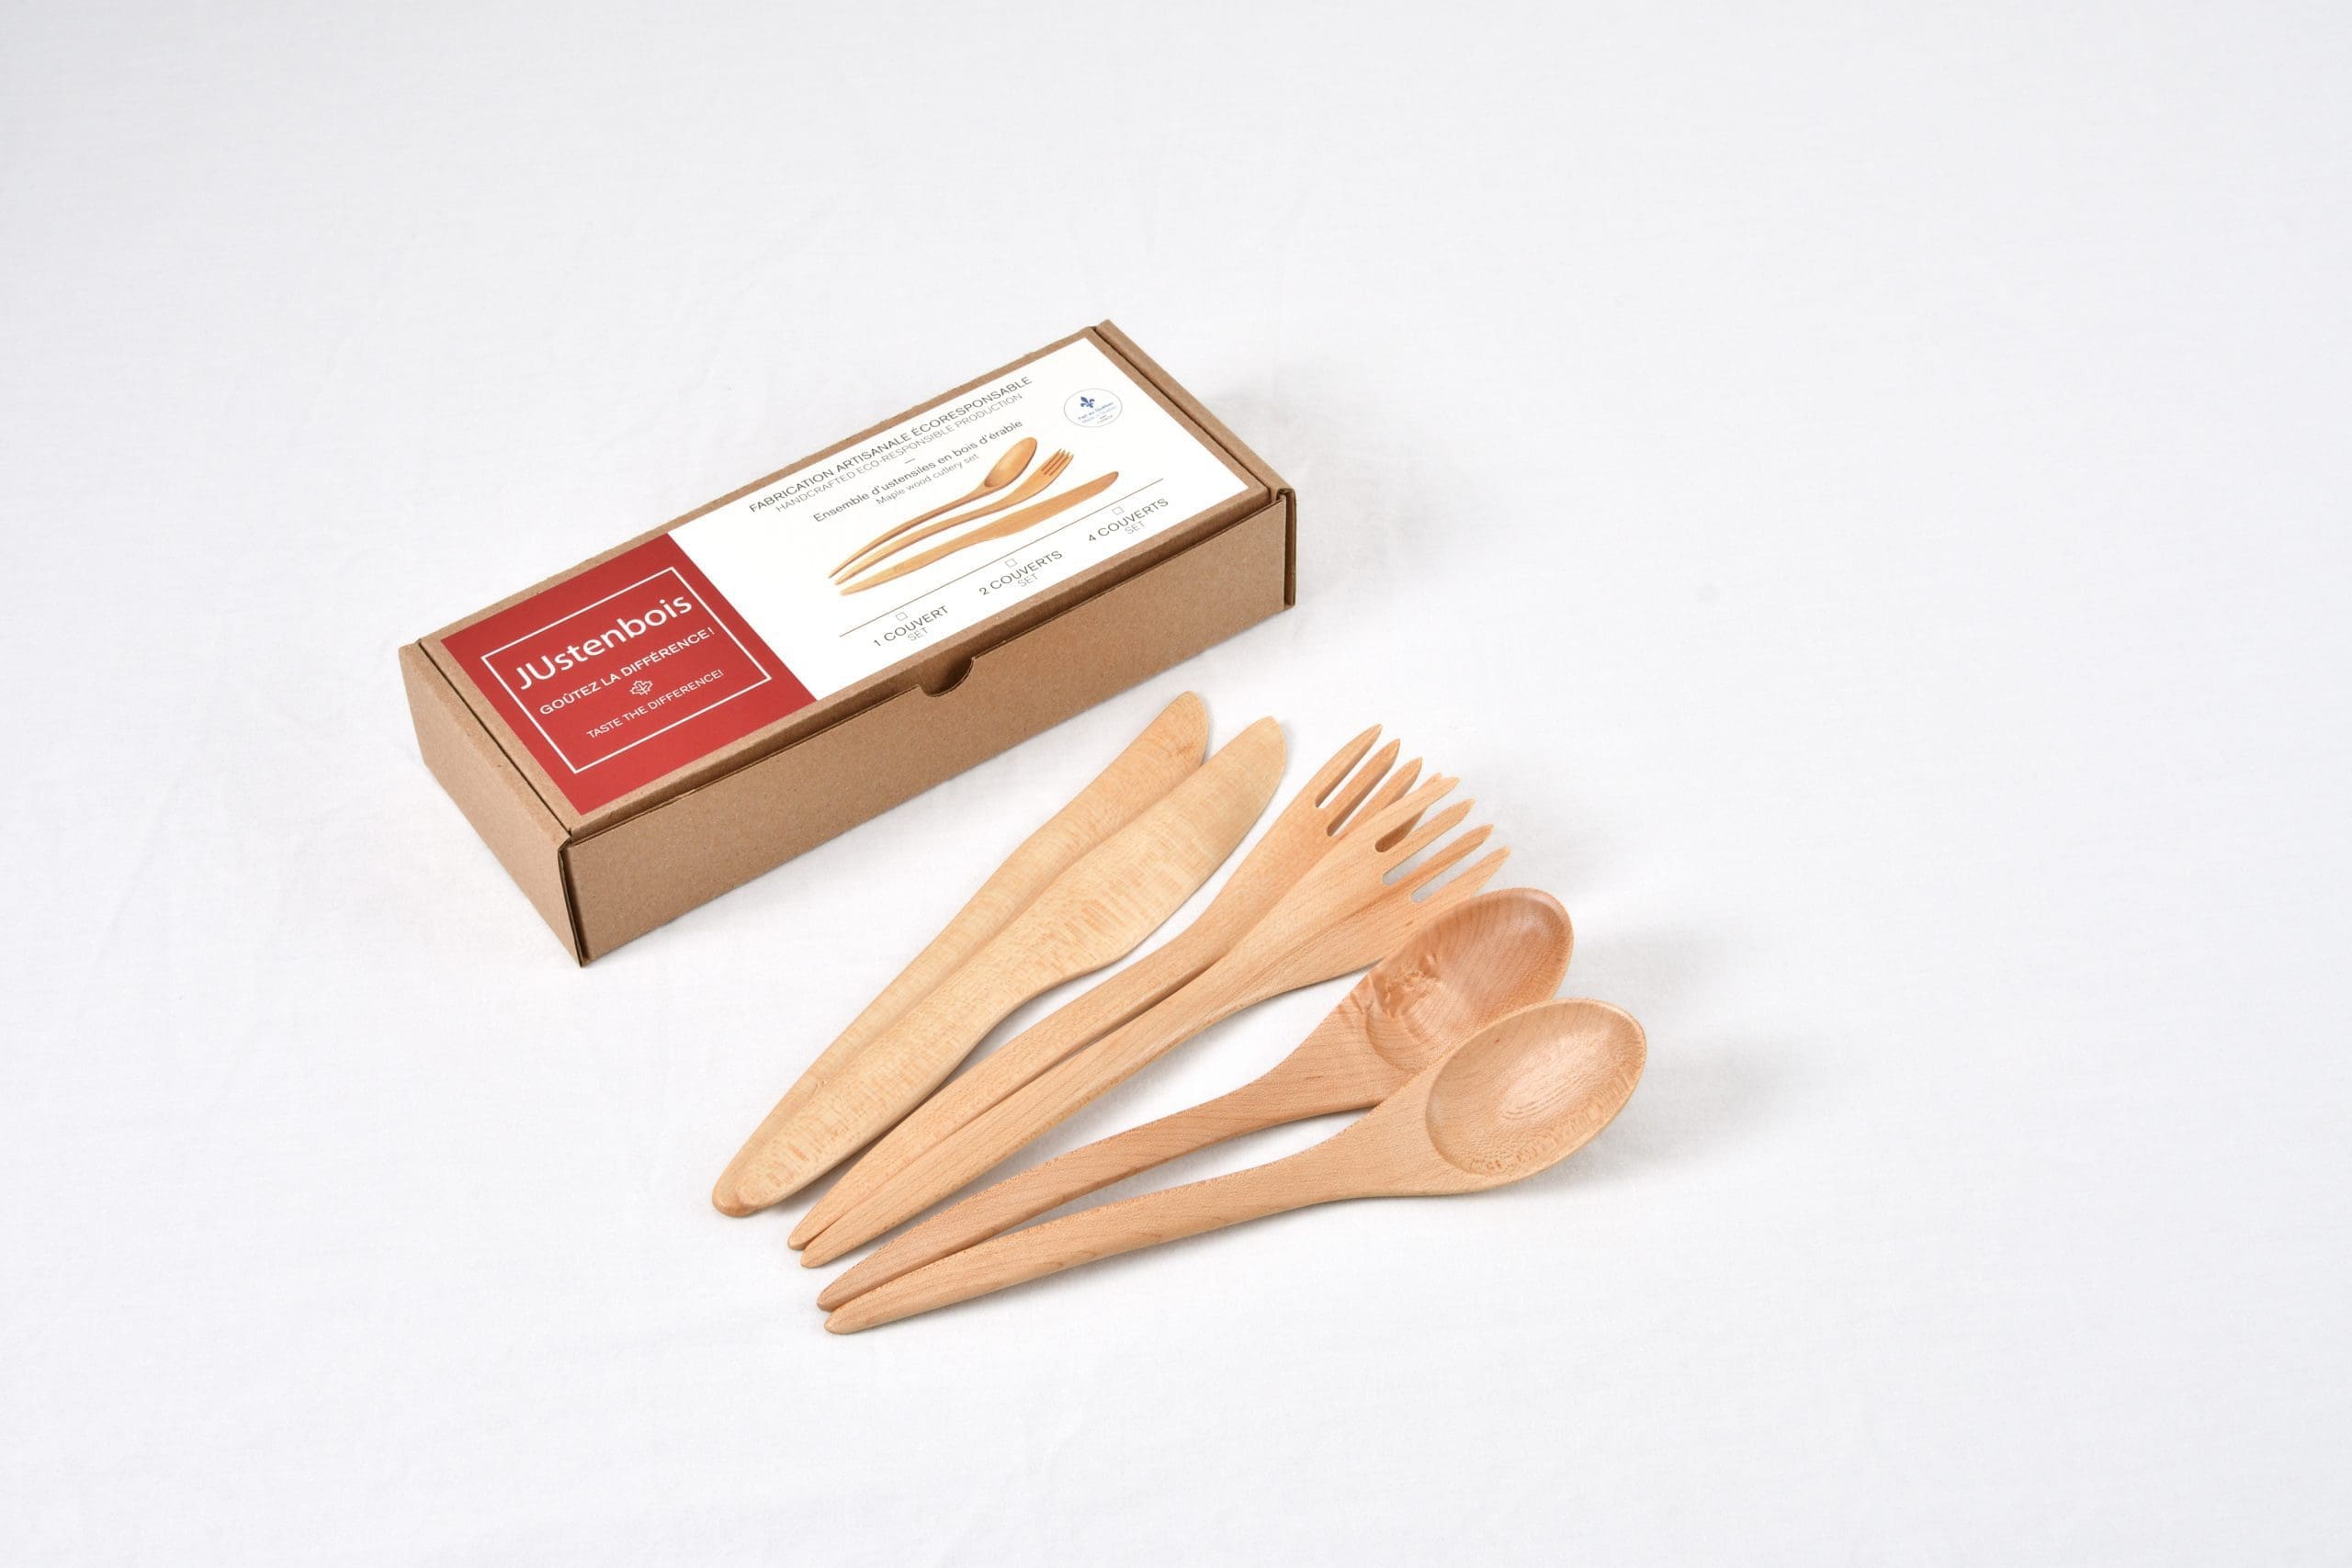 https://justenbois.com/wp-content/uploads/2022/07/2-SETS-of-Cutlery-beside-Box-scaled.jpg